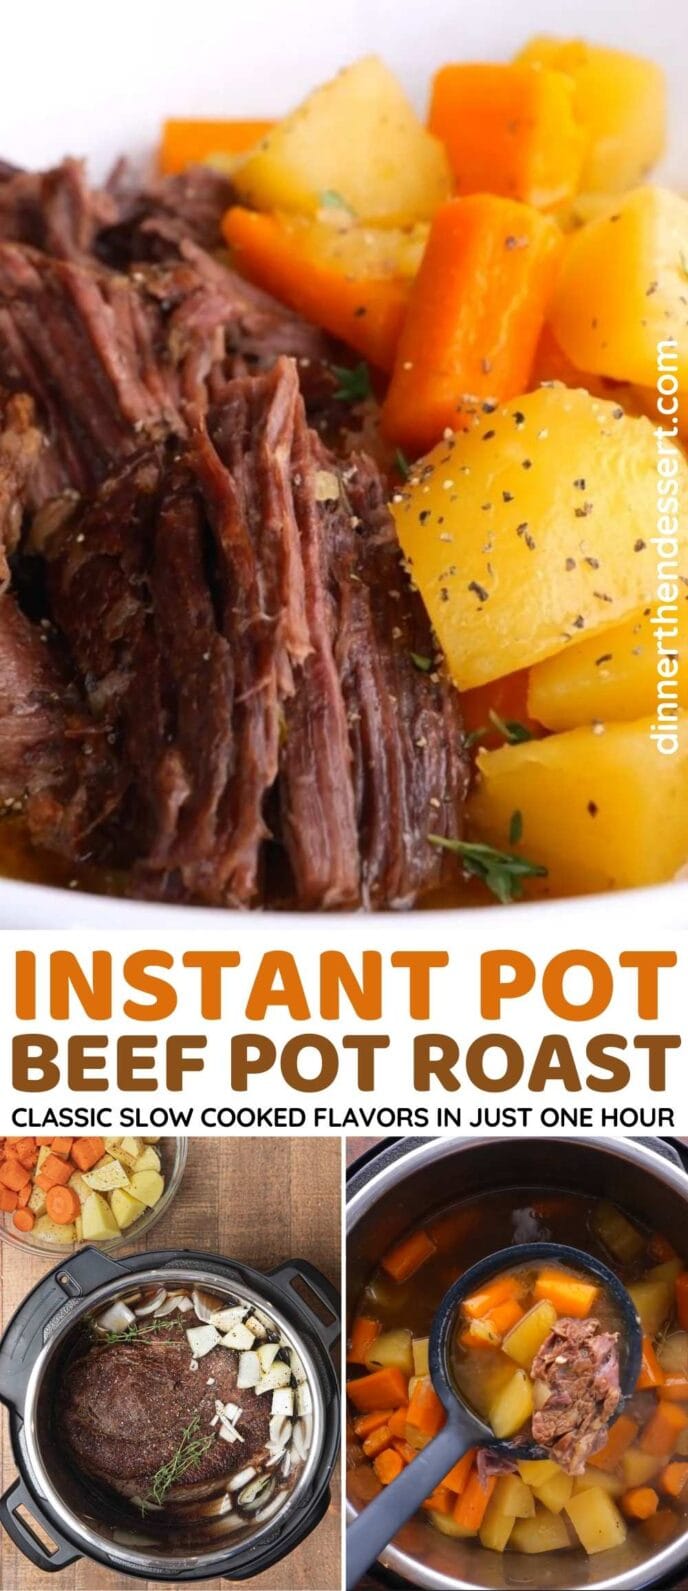 Instant Pot Beef Pot Roast with vegetables Collage